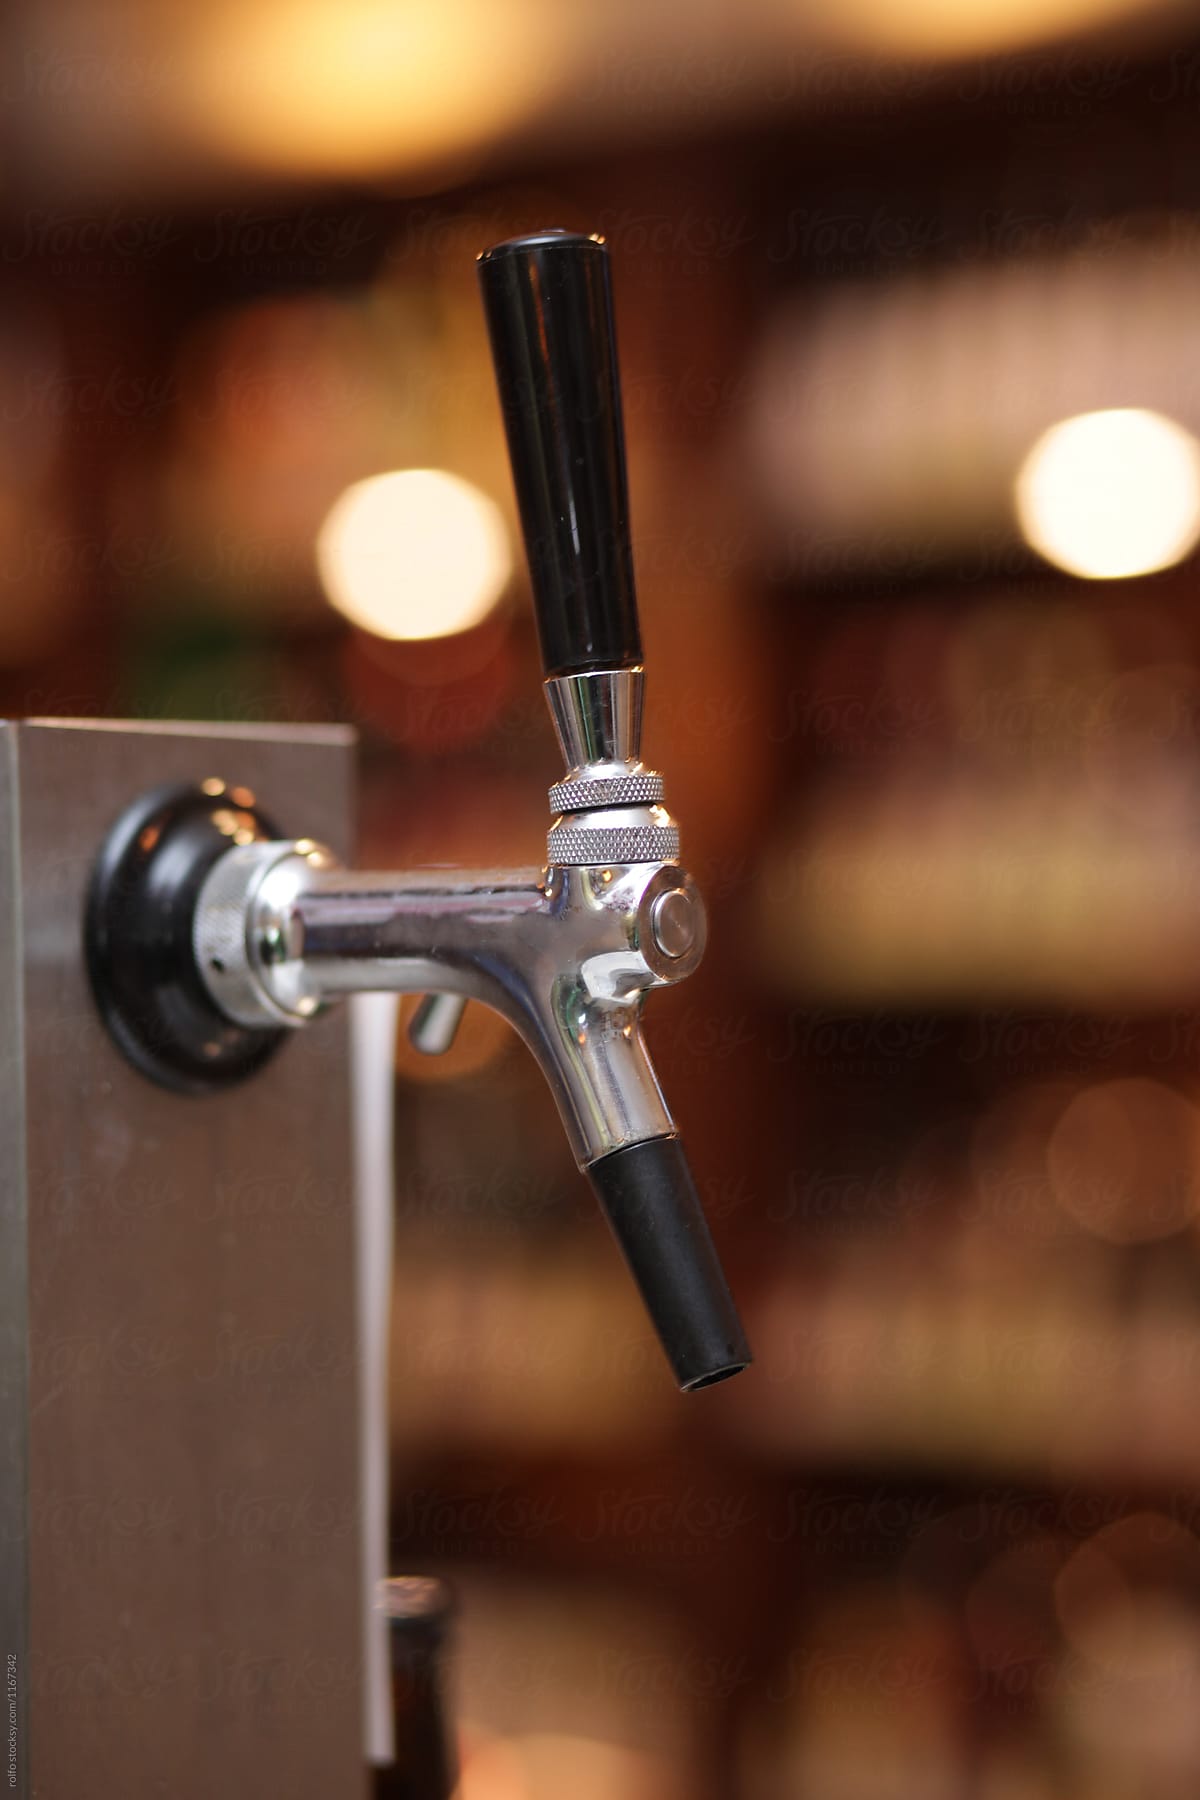 Beer tap in close-up